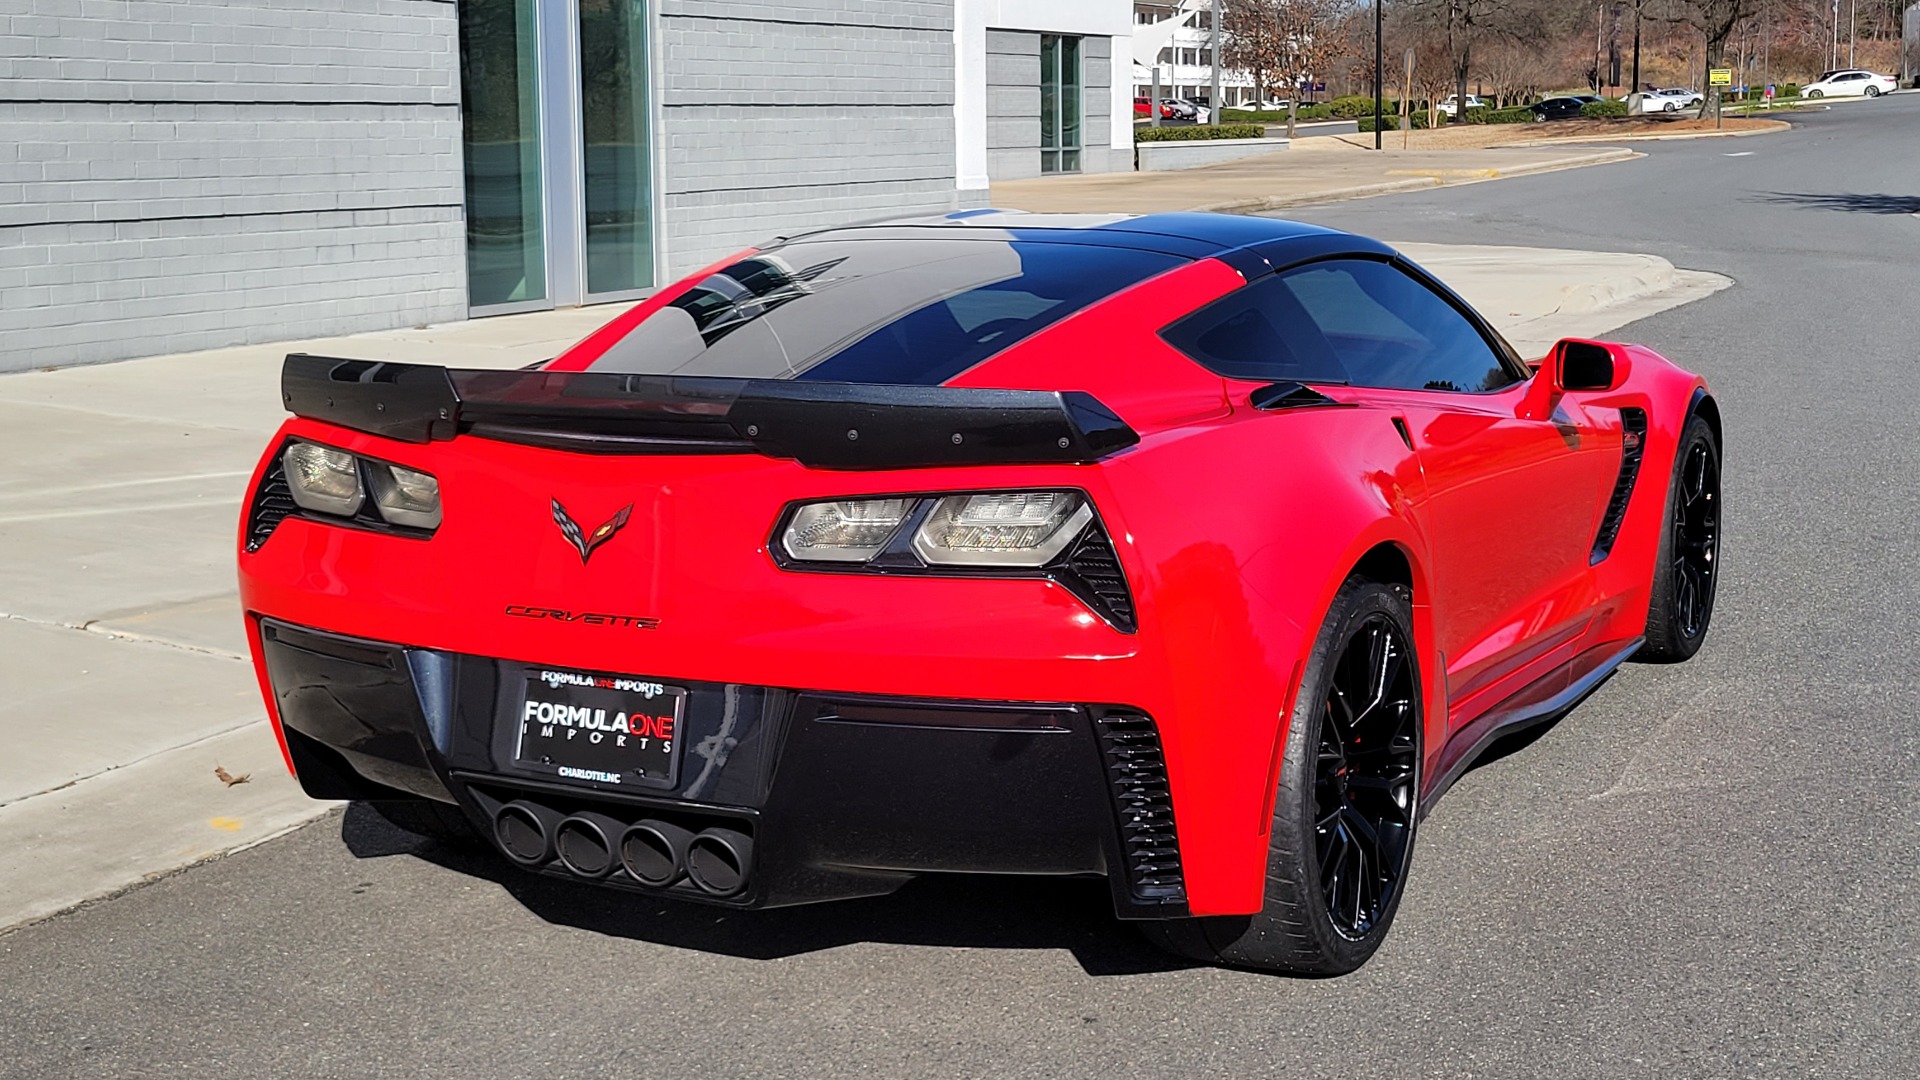 Used 2015 Chevrolet CORVETTE Z06 COUPE 2LZ (650HP+) / NAV / BOSE / PERF DATA RECORDER / REARVIEW for sale $69,500 at Formula Imports in Charlotte NC 28227 9